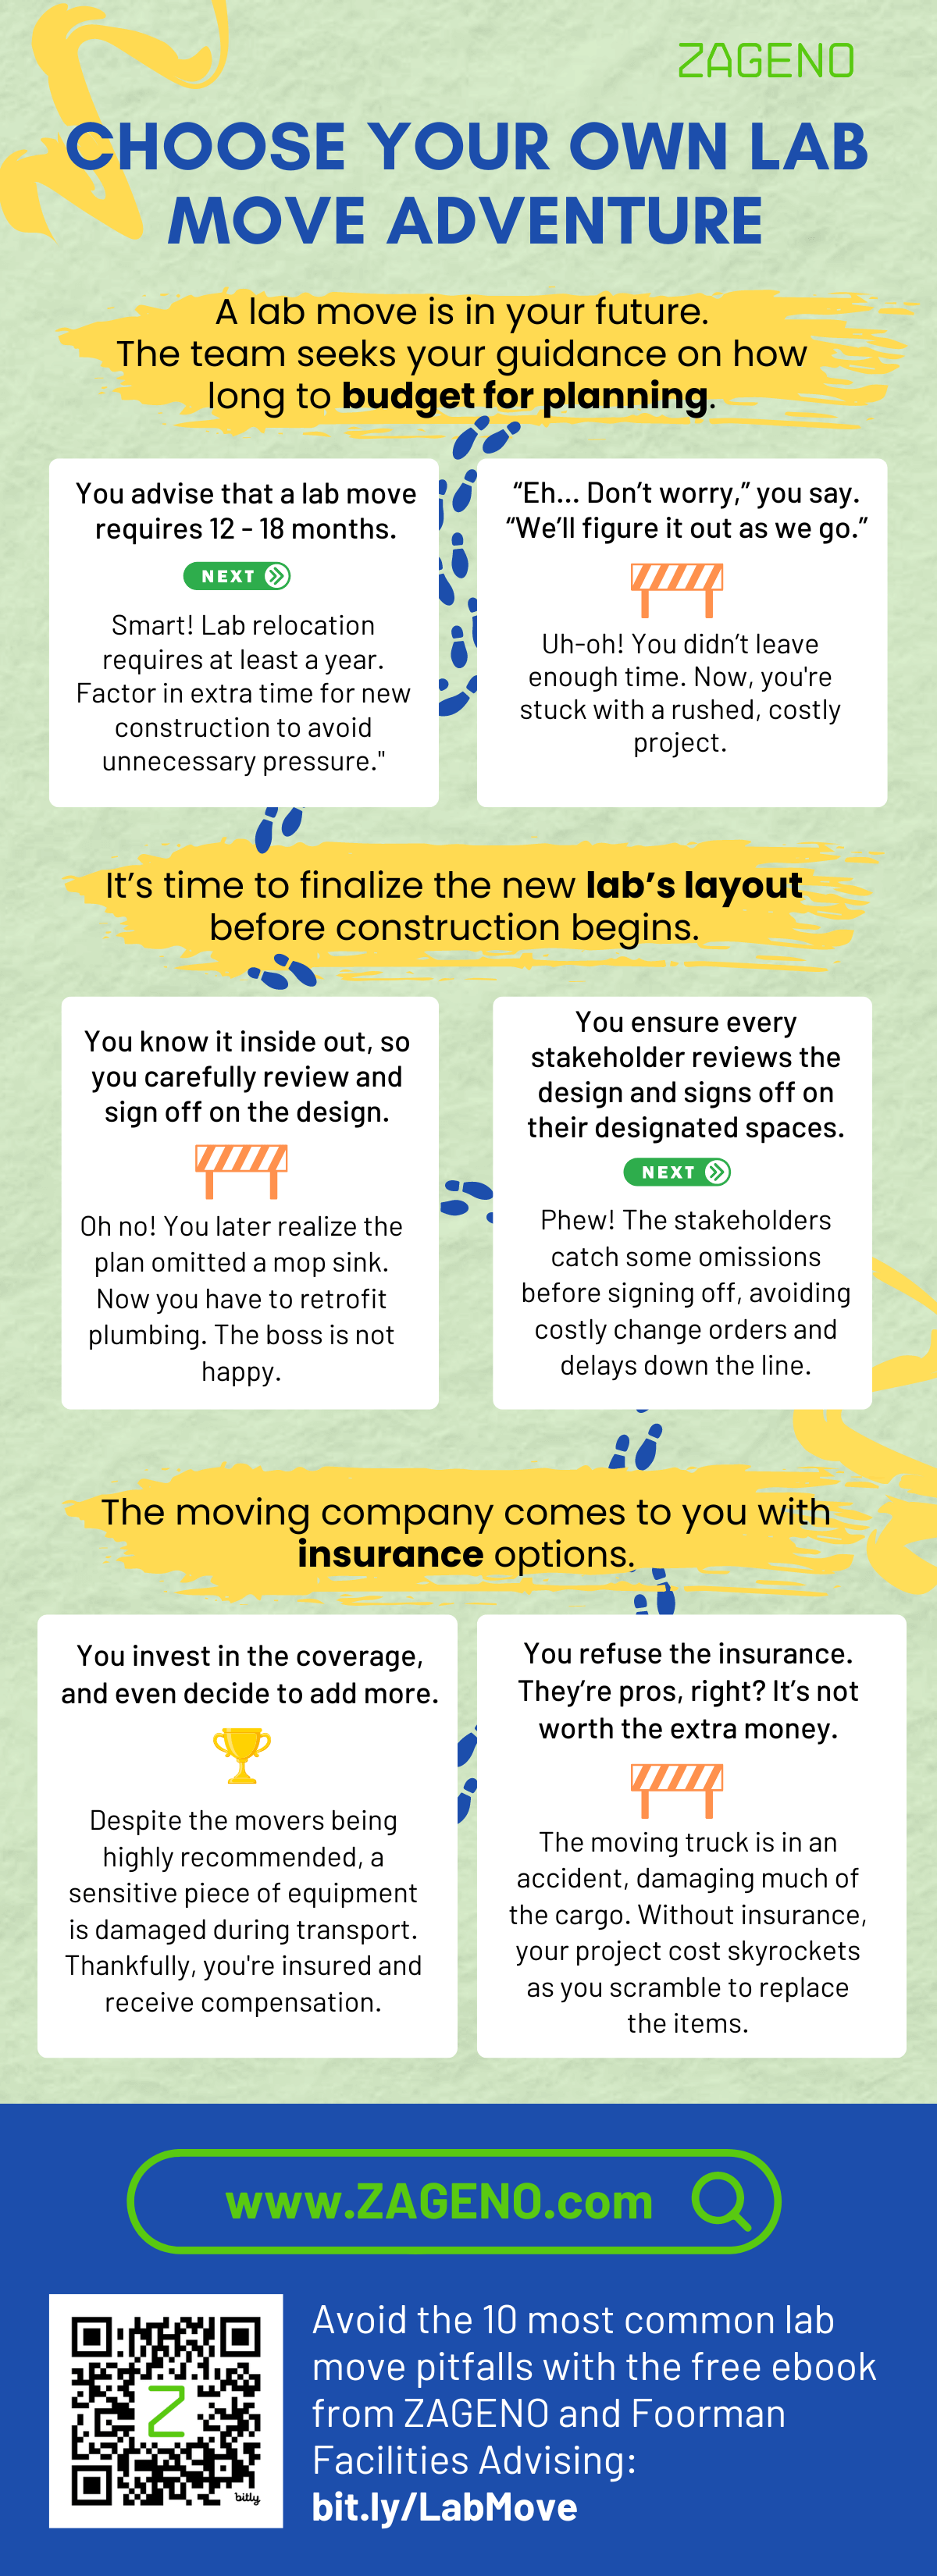 ZAGENO infographic - Choose Your Own Adventure